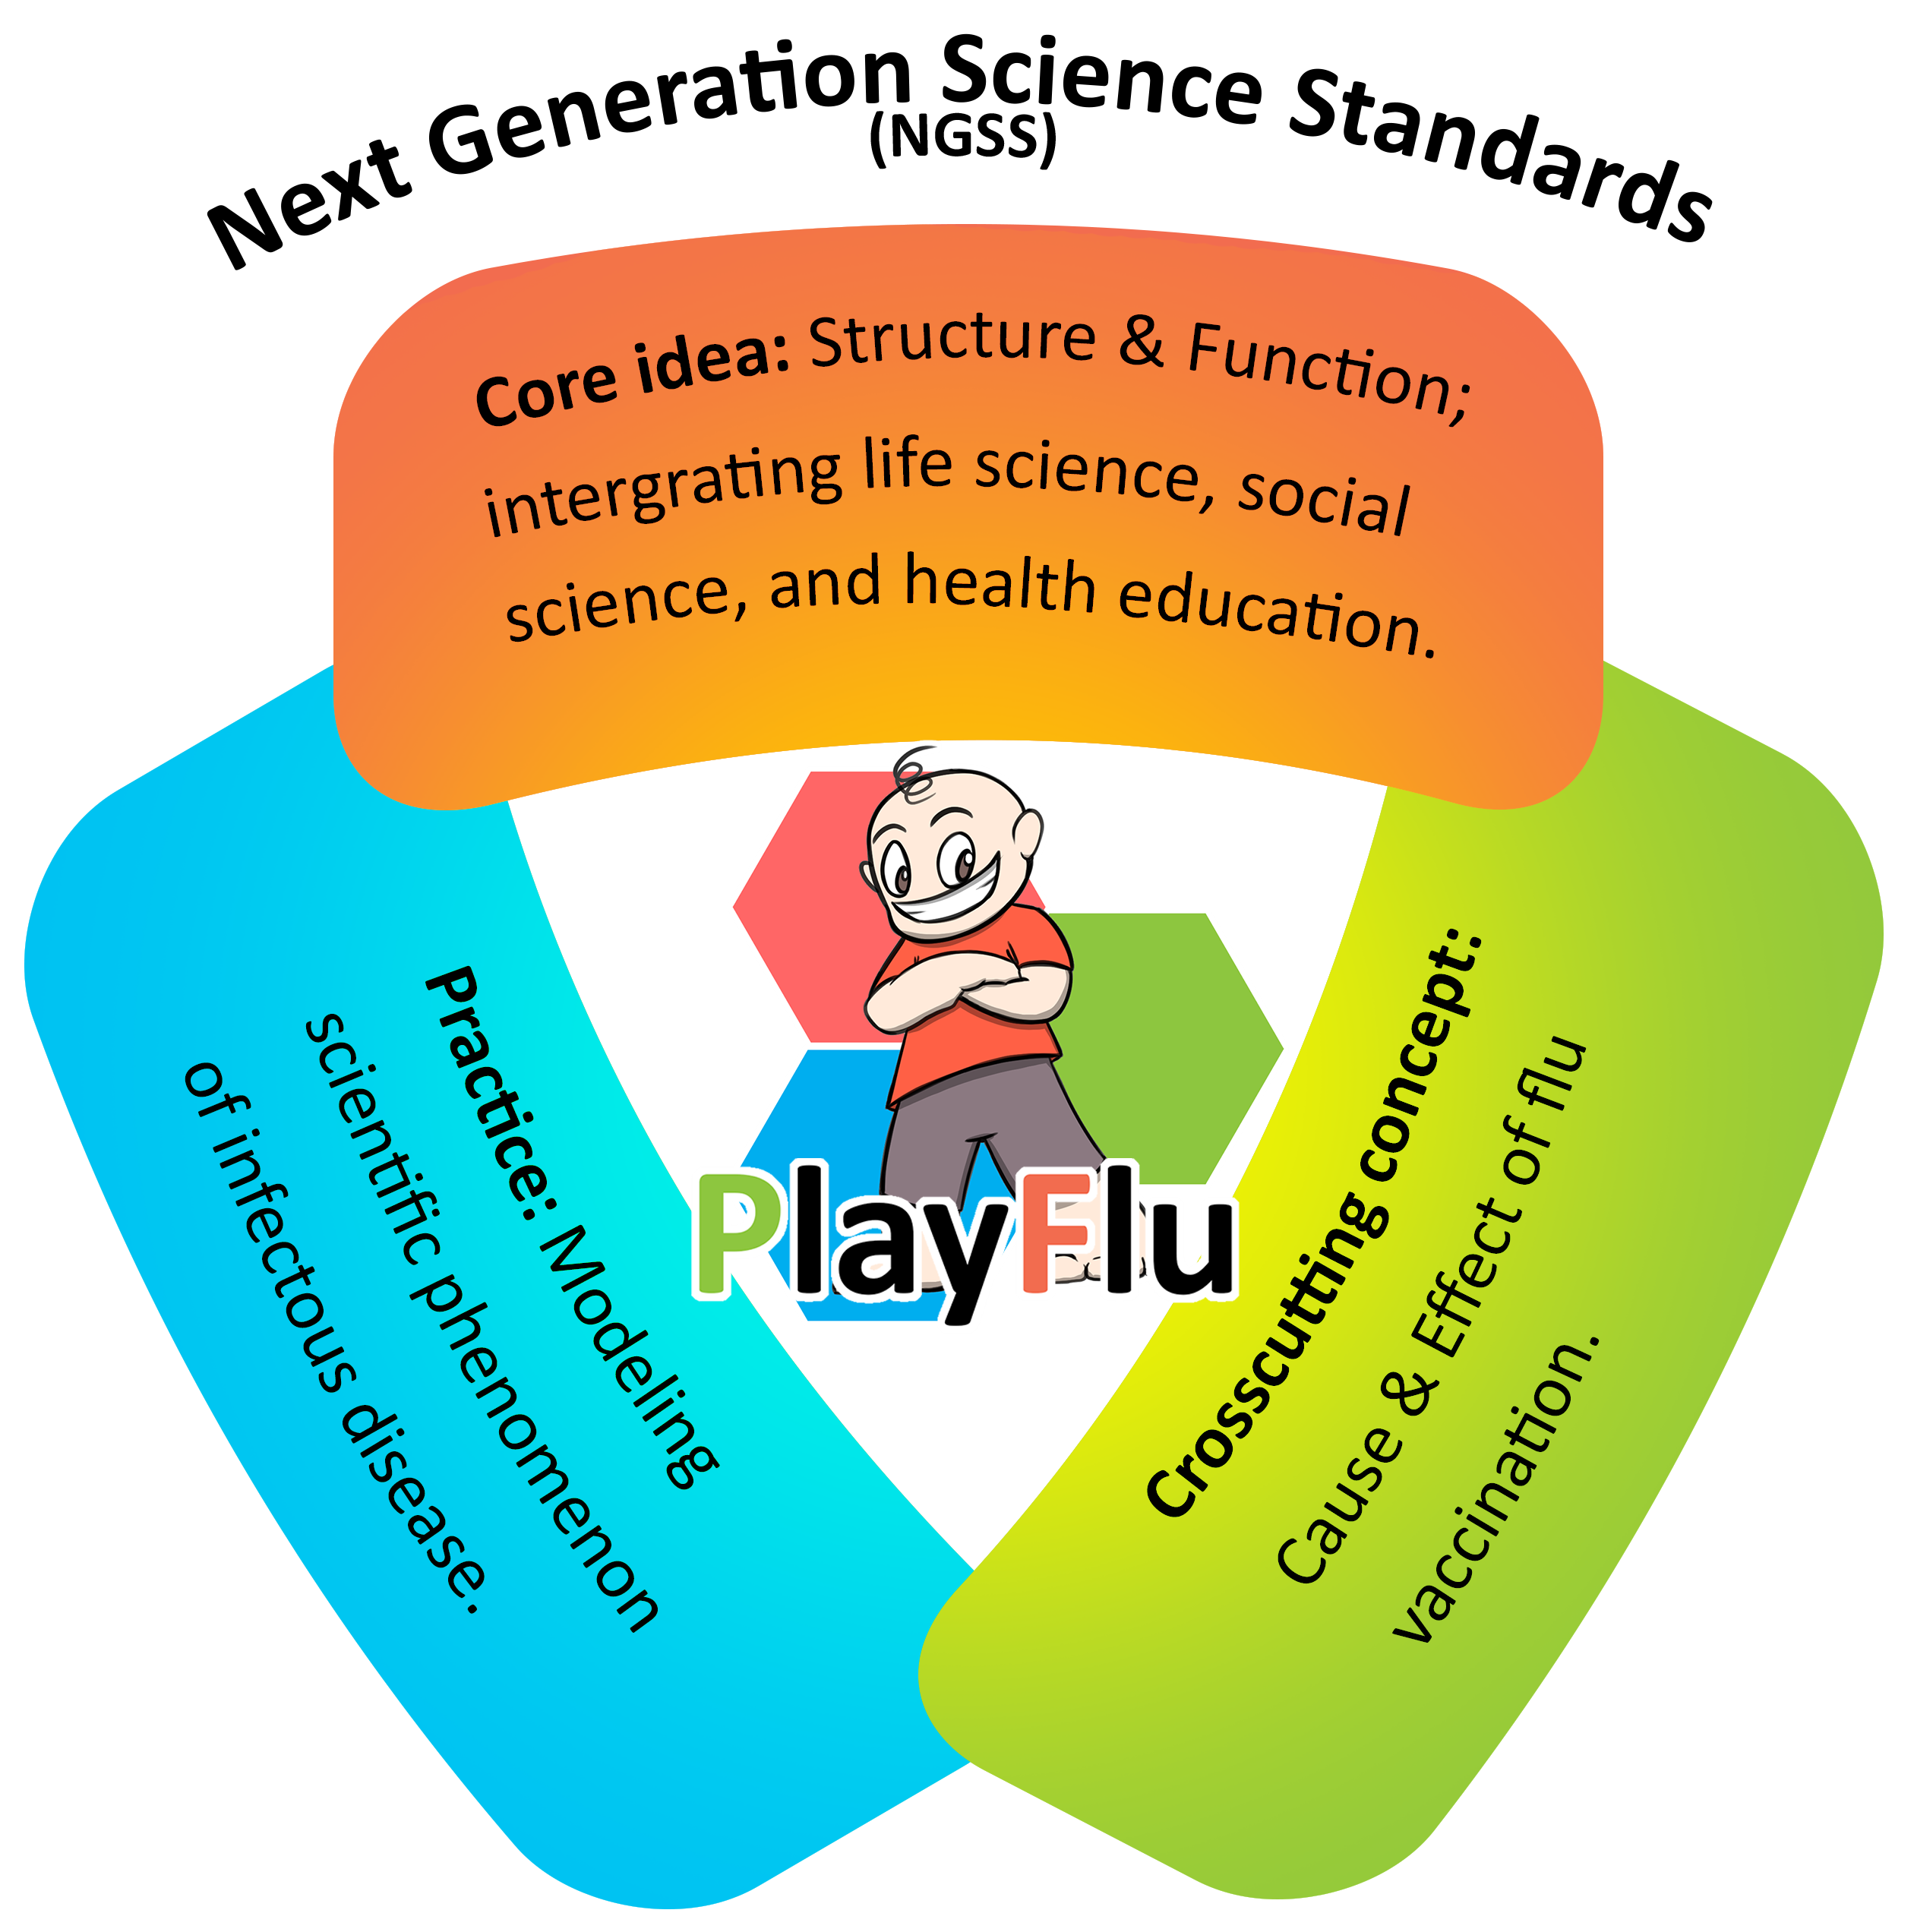 PlayFlu image with NGSS standards